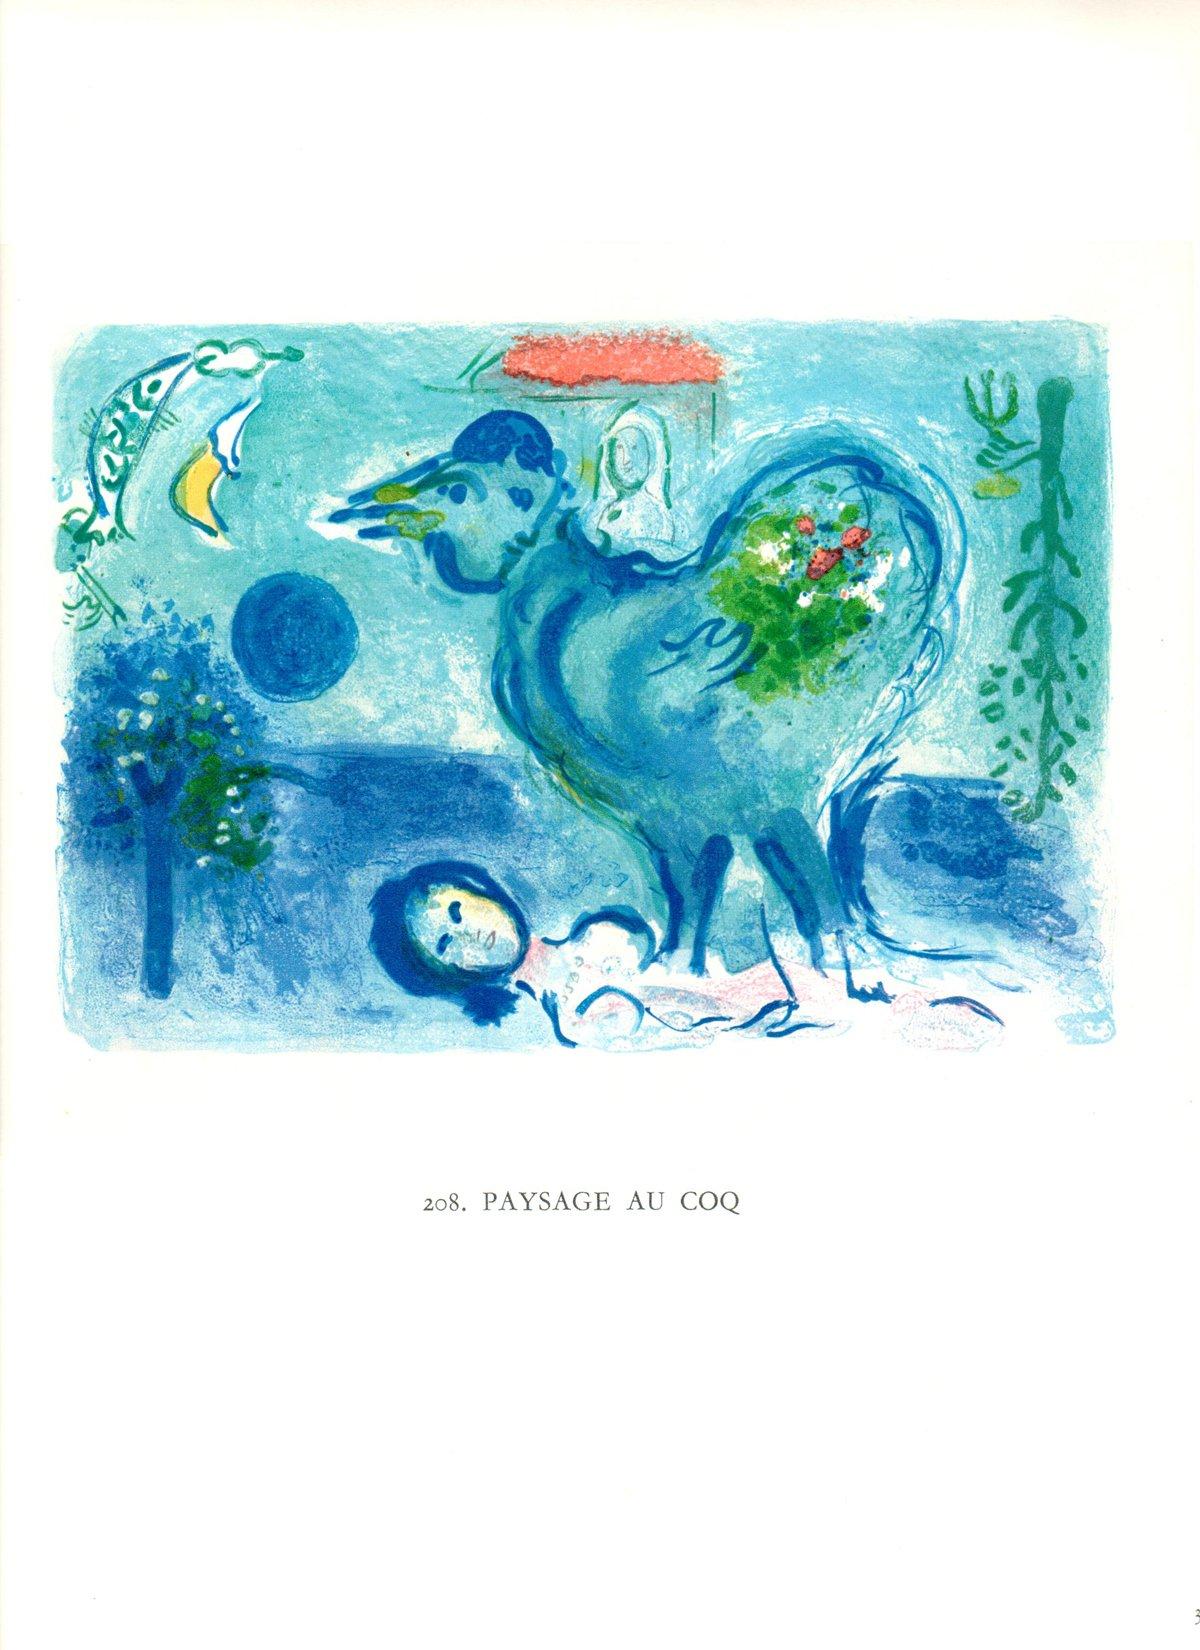 Paper Size: 12.5 x 9.75 inches ( 31.75 x 24.765 cm )
 Image Size: 6.5 x 8.5 inches ( 16.51 x 21.59 cm )
 Framed: No
 Condition: A: Mint
 
 Additional Details: Book page 33 in Chagall Lithographe II (1957-1962), Andre Sauret, Paris, 1963.